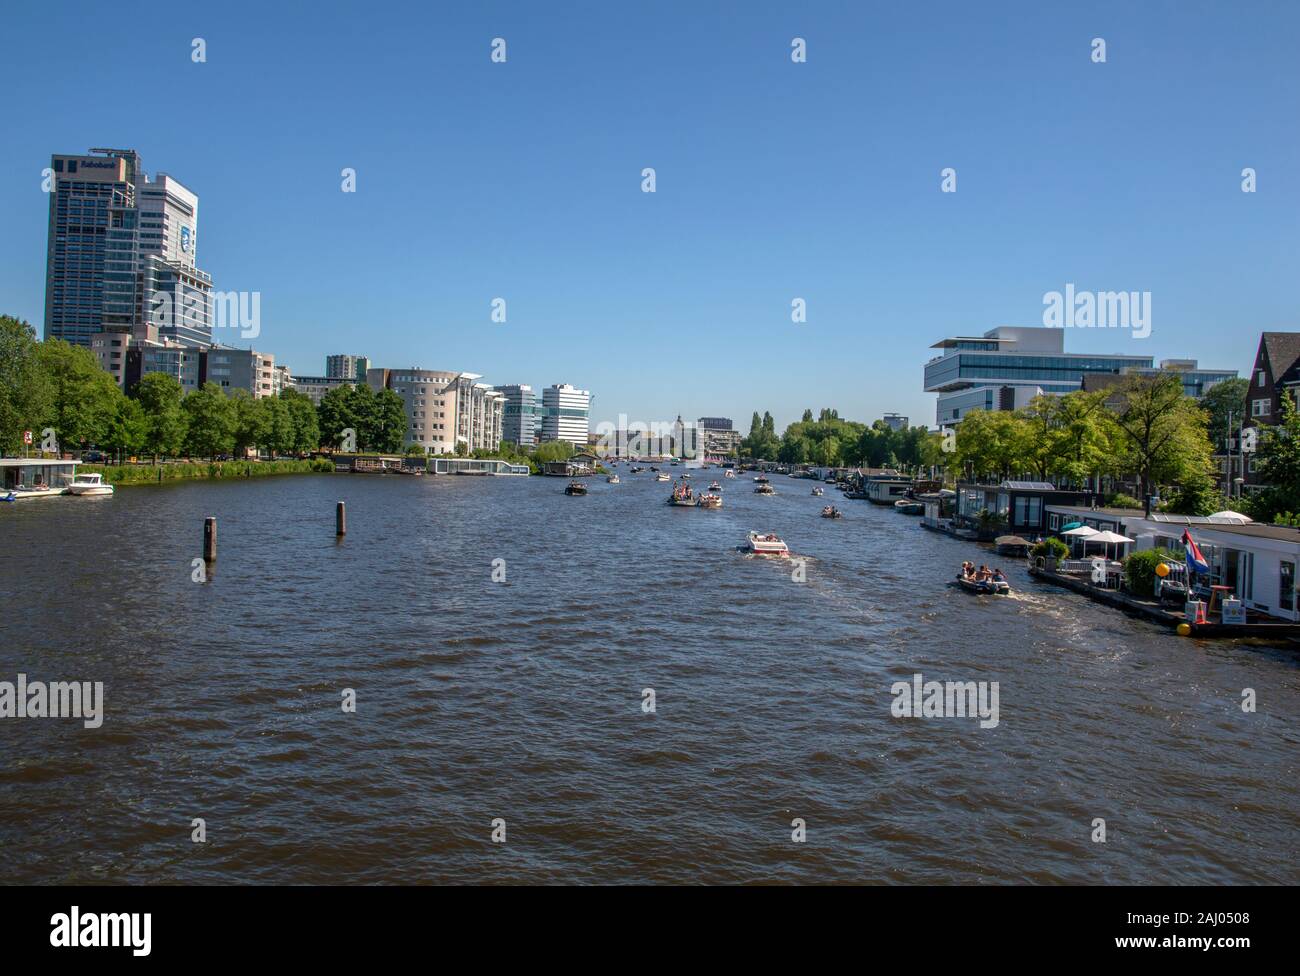 Blue Sky At The Amstel River Amsterdam The Netherlands 2019 Stock Photo